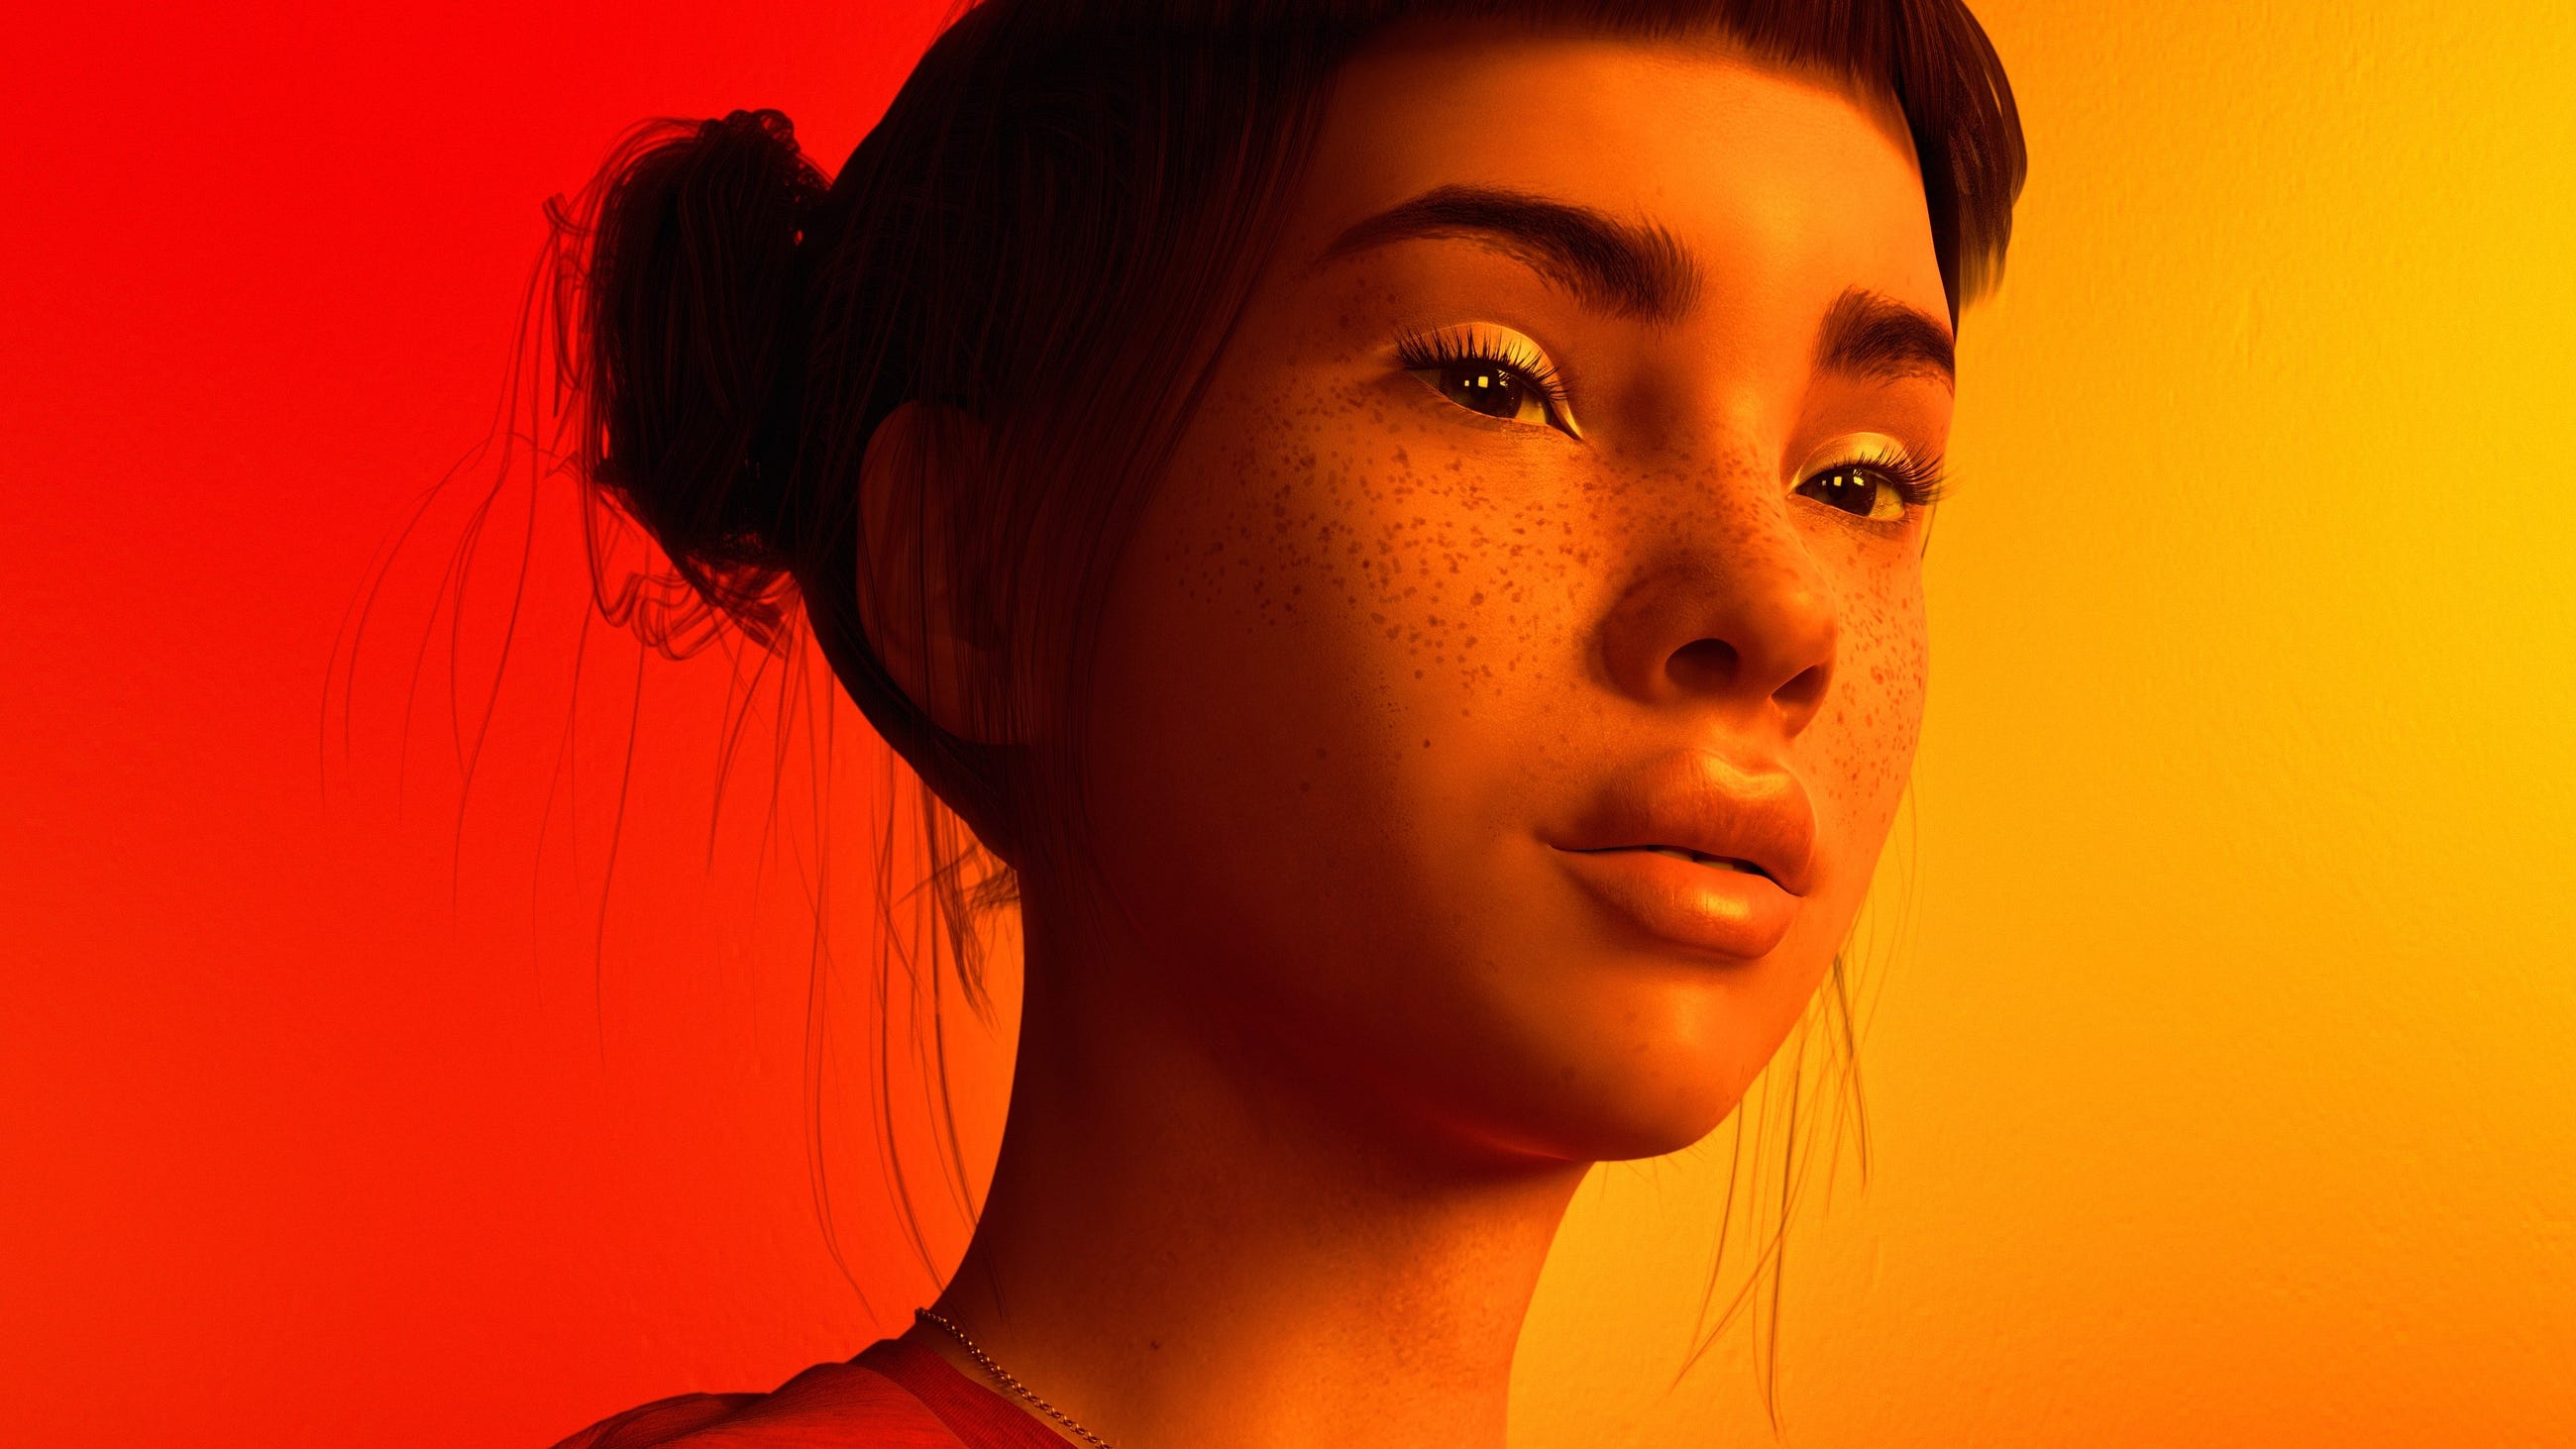  - lil miquela instagram fans can t decide if model is real or a